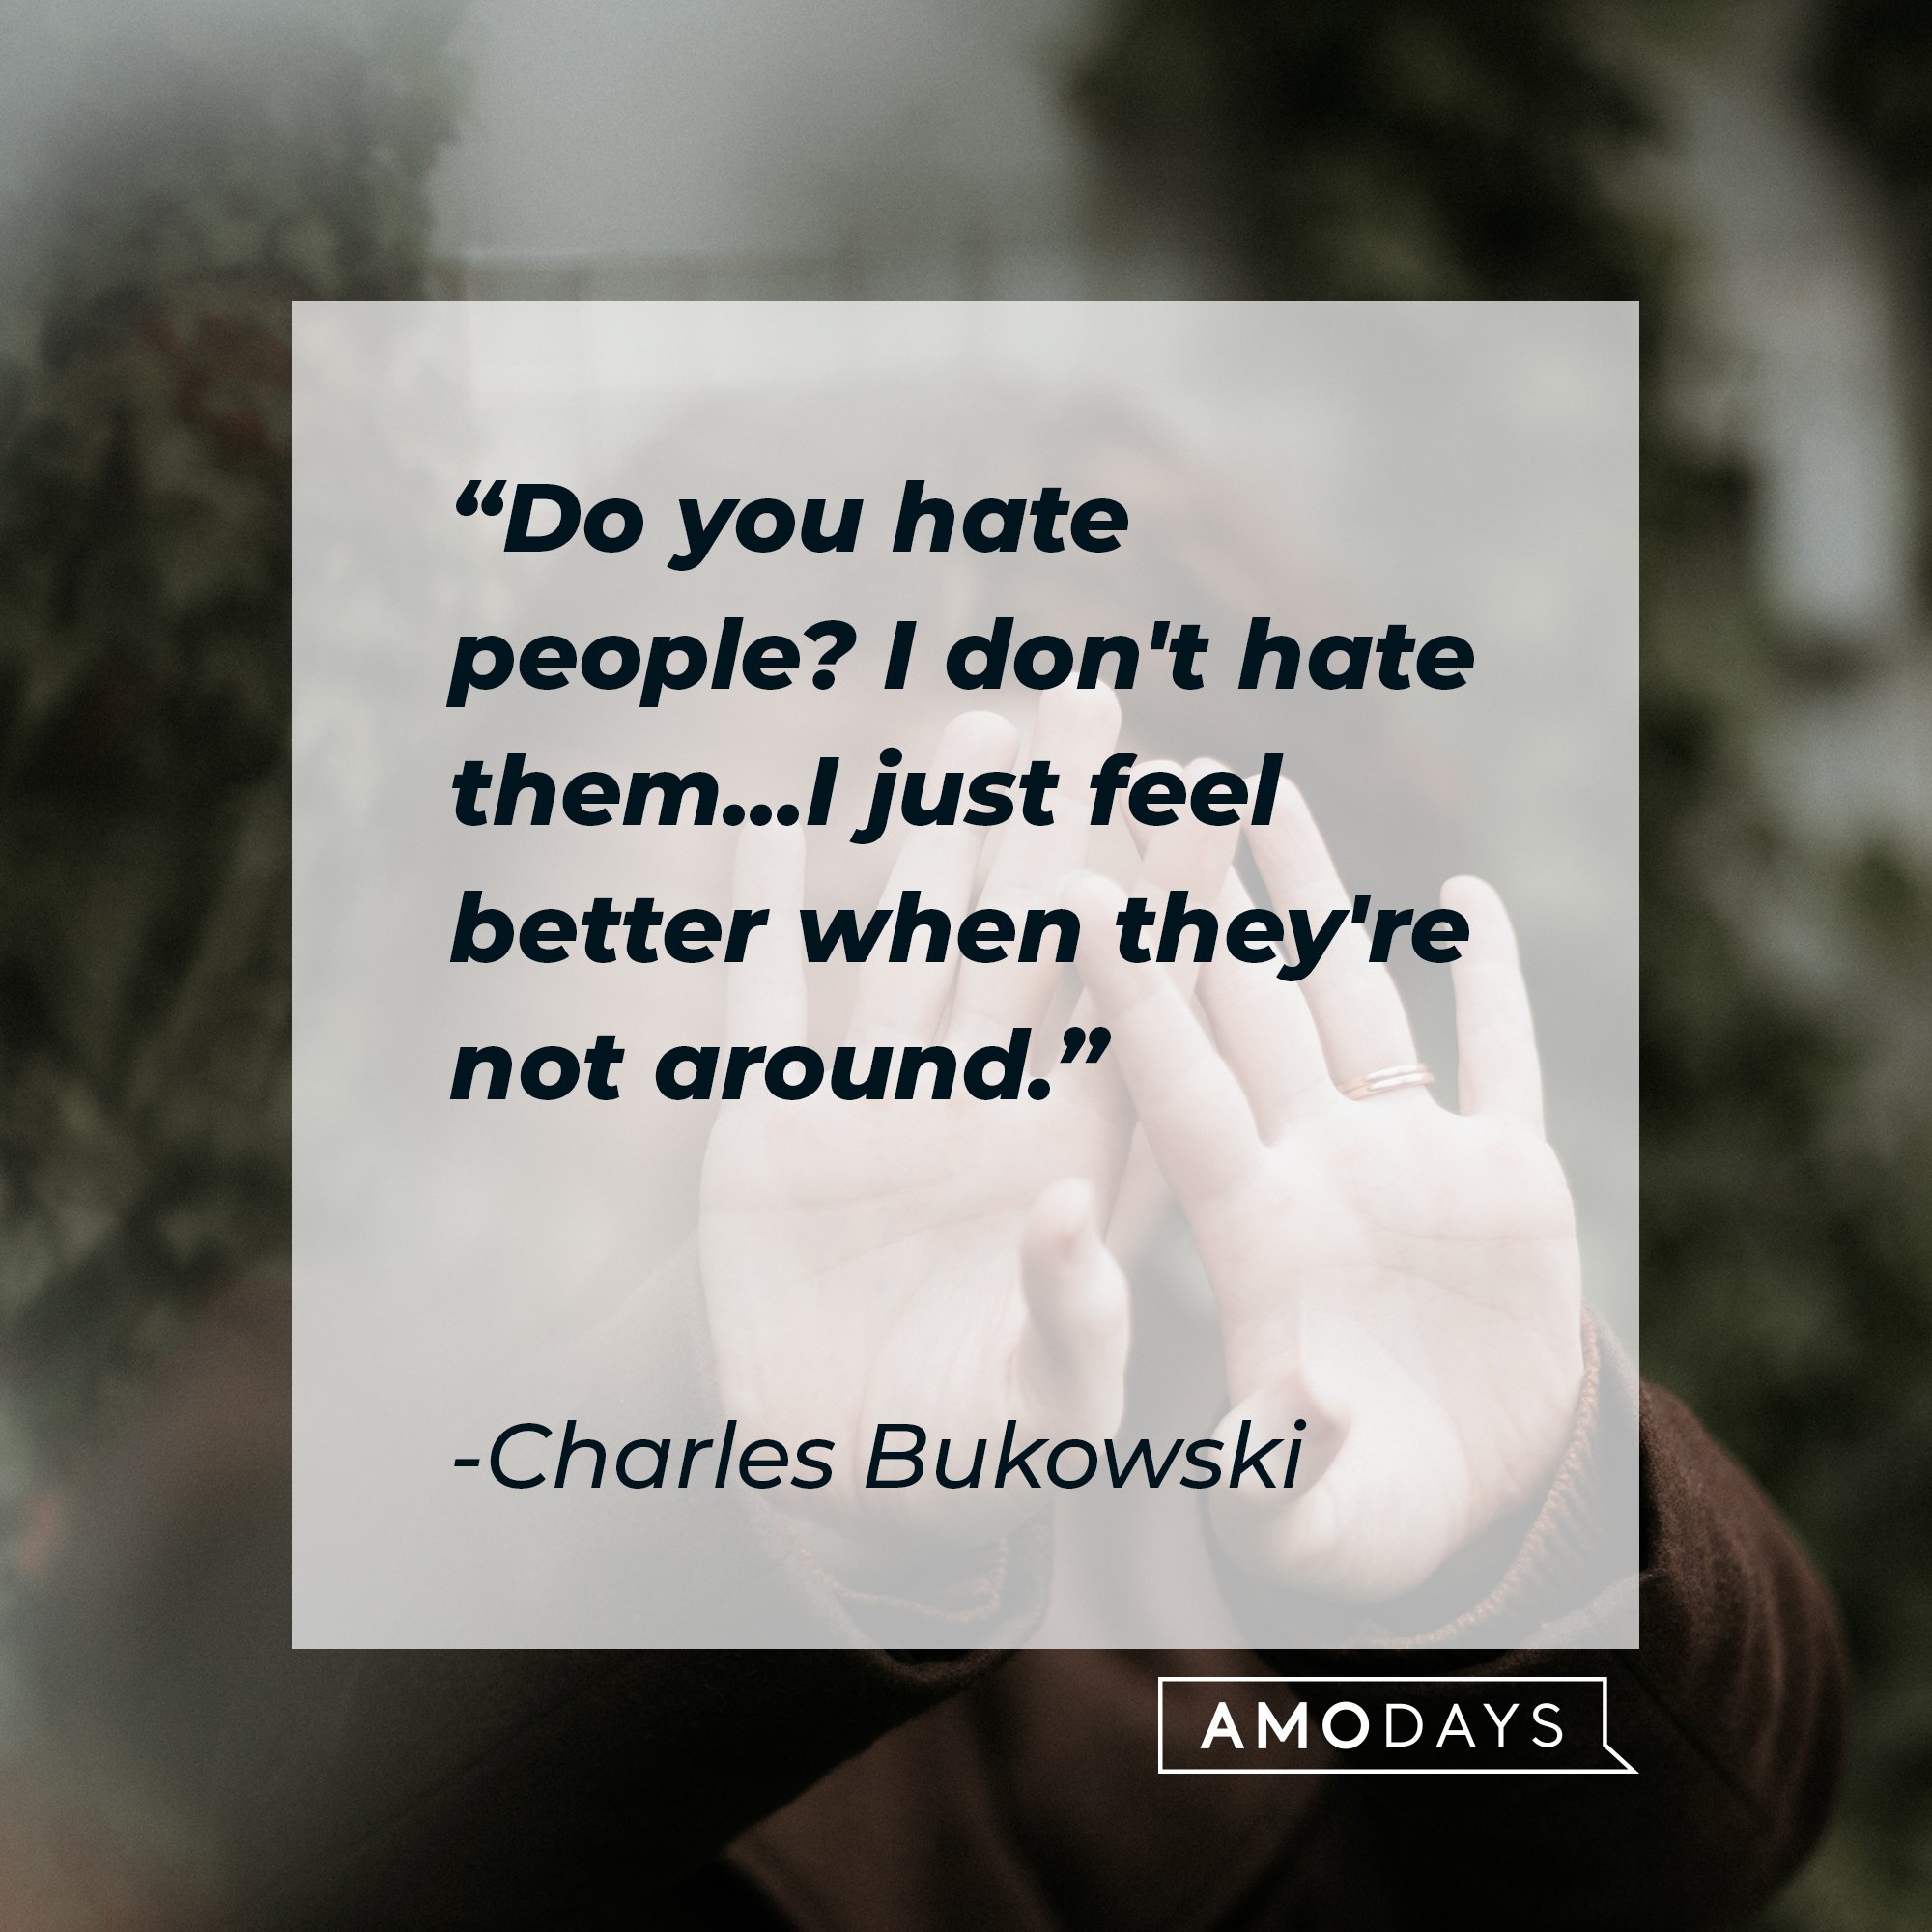 Charles Bukowski’s quote: "Do you hate people? I don't hate them...I just feel better when they're not around." | Image: AmoDays 